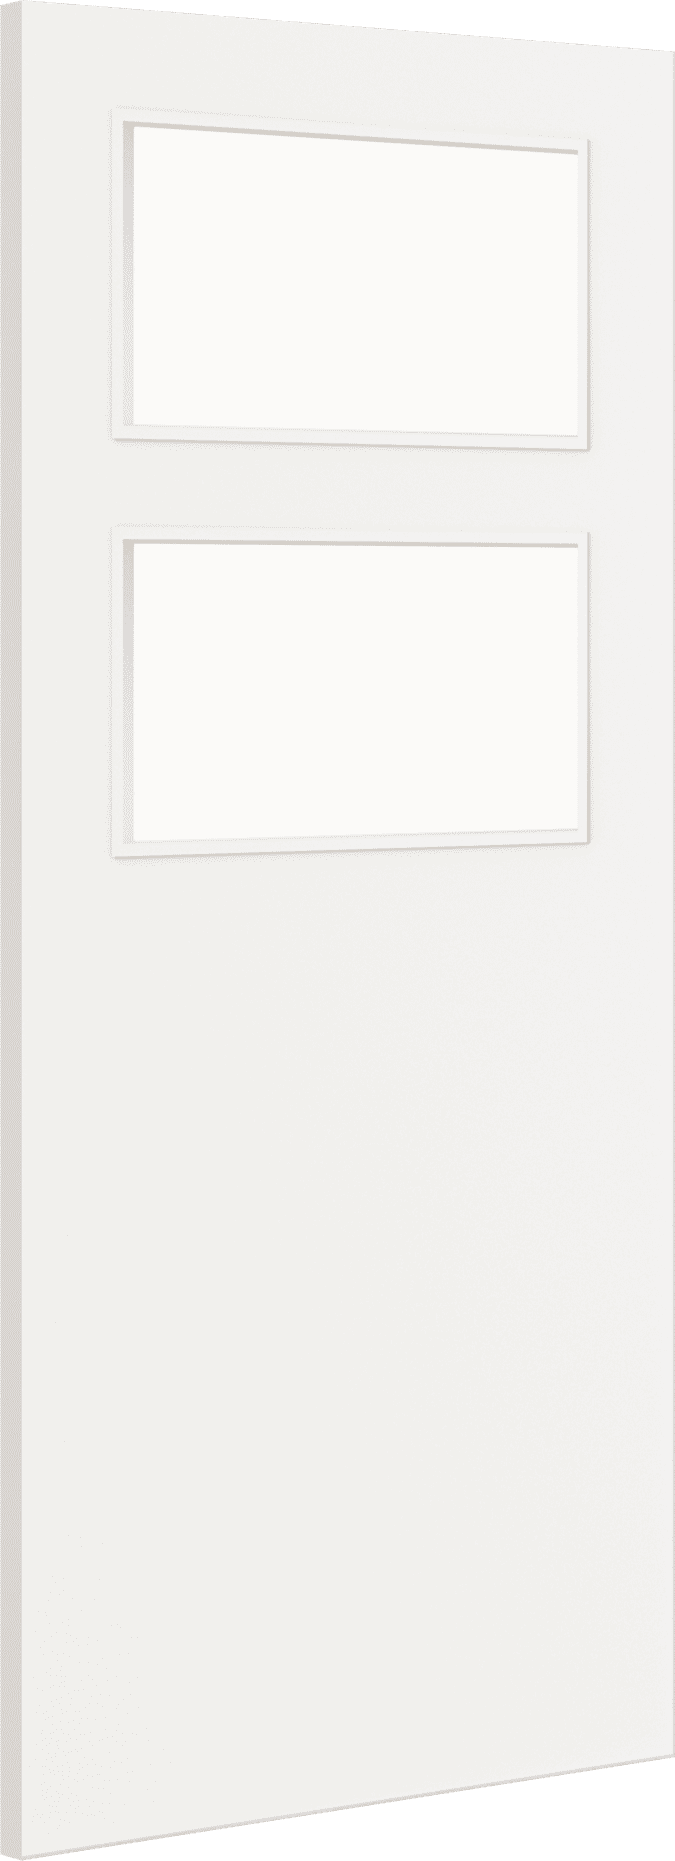 2040mm x 826mm x 44mm Architectural Paint Grade White 02 Clear Glazed Fire Door Blank